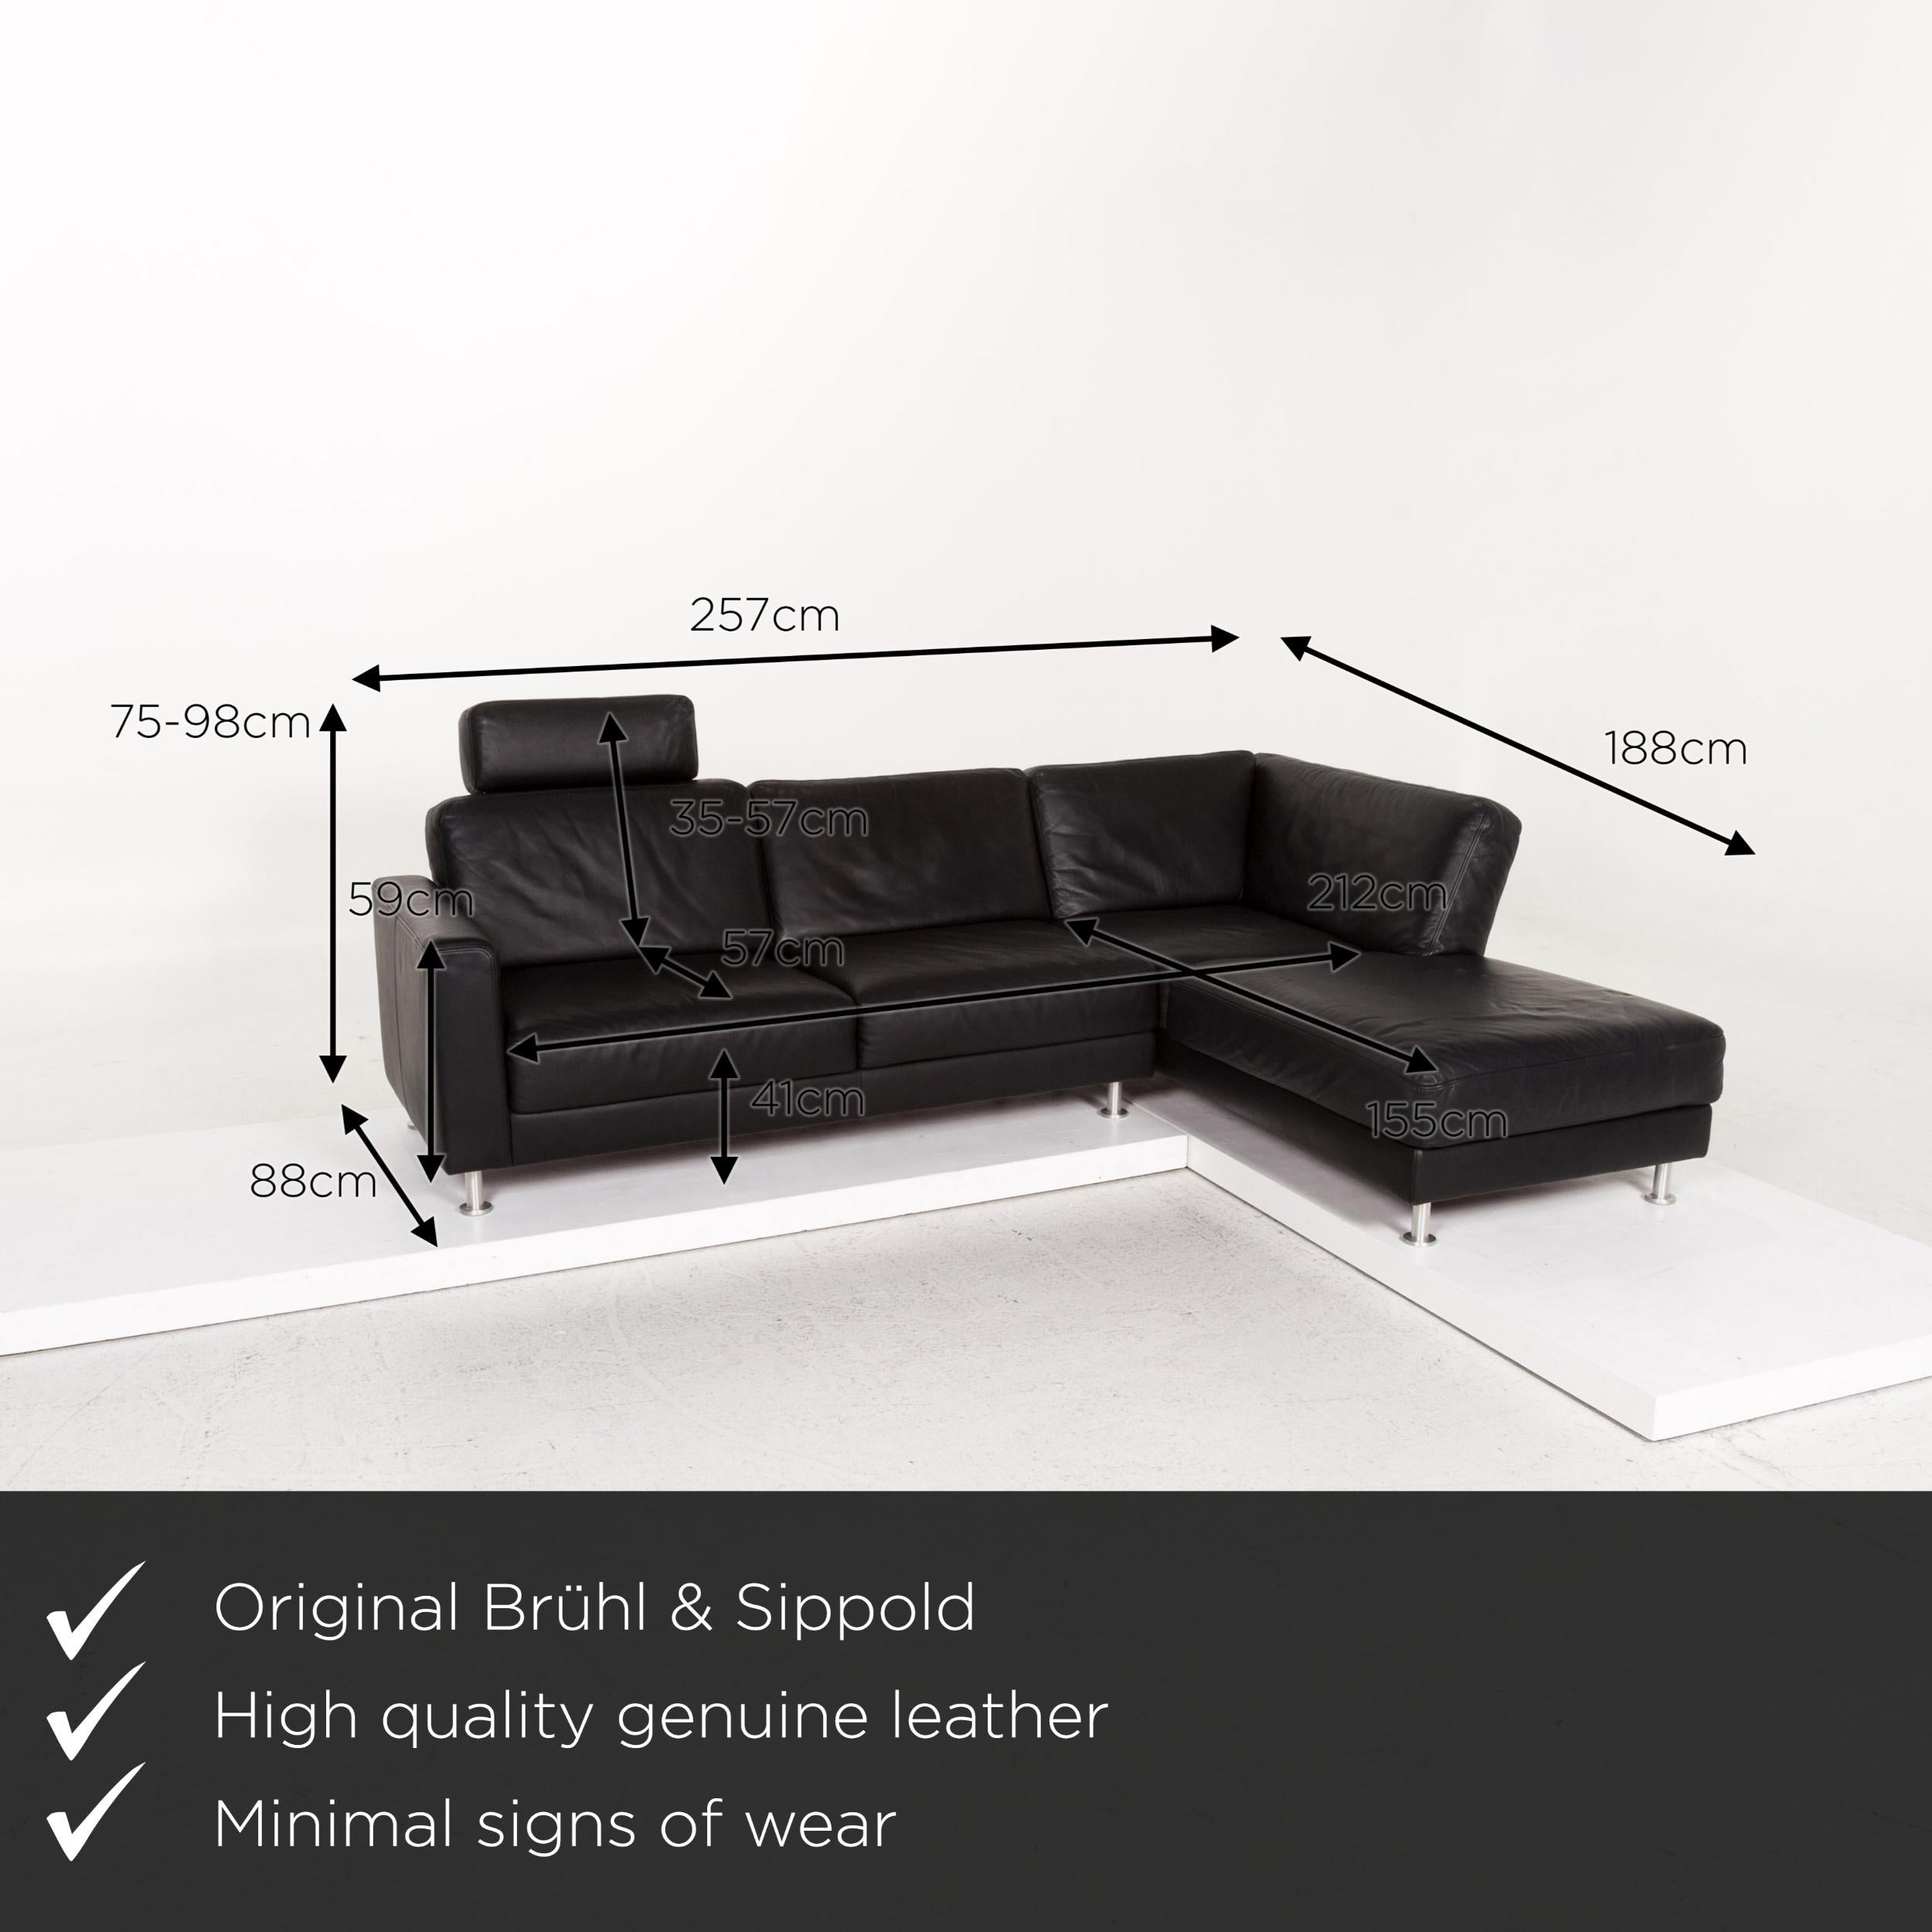 We present to you a Brühl & Sippold Fiesta leather sofa set black 1 corner sofa 2 armchair.

 

 Product measurements in centimeters:
 

Depth 88
Width 257
Height 75
Seat height 41
Rest height 59
Seat depth 57
Seat width 212
Back